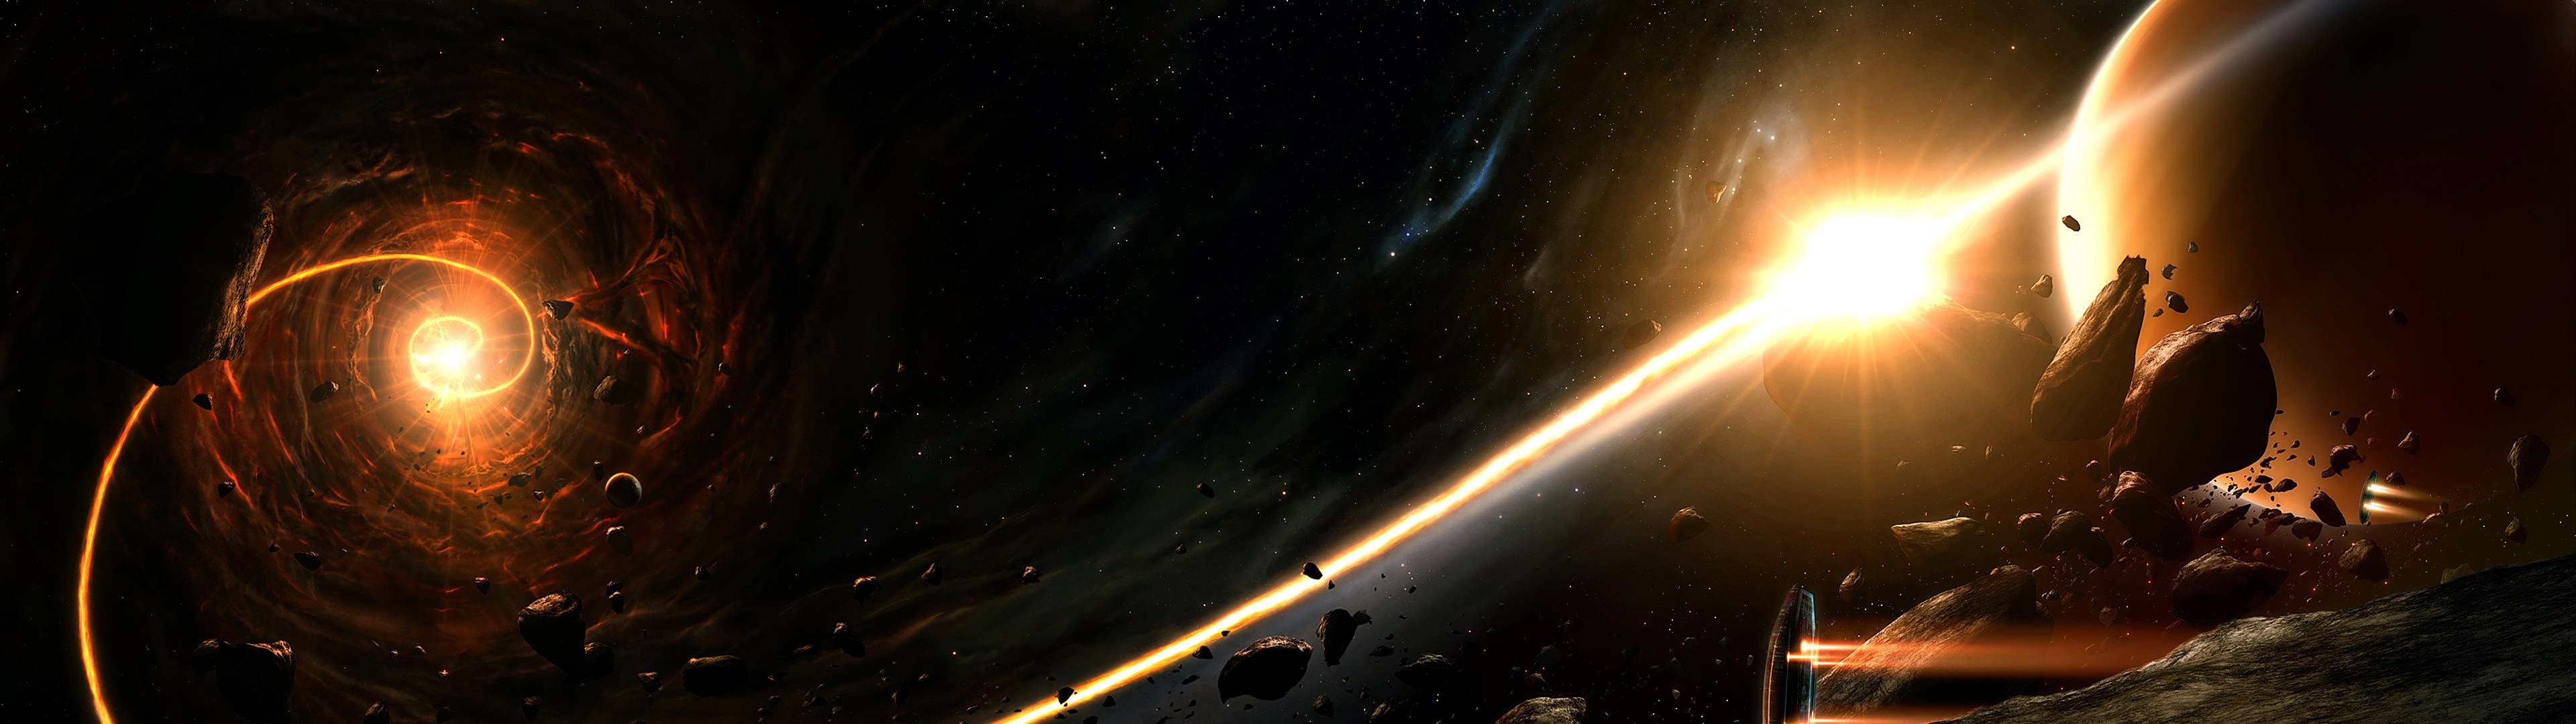 3840x1080 Dual monitor wallpapers - mostly space themed - Album on Imgur